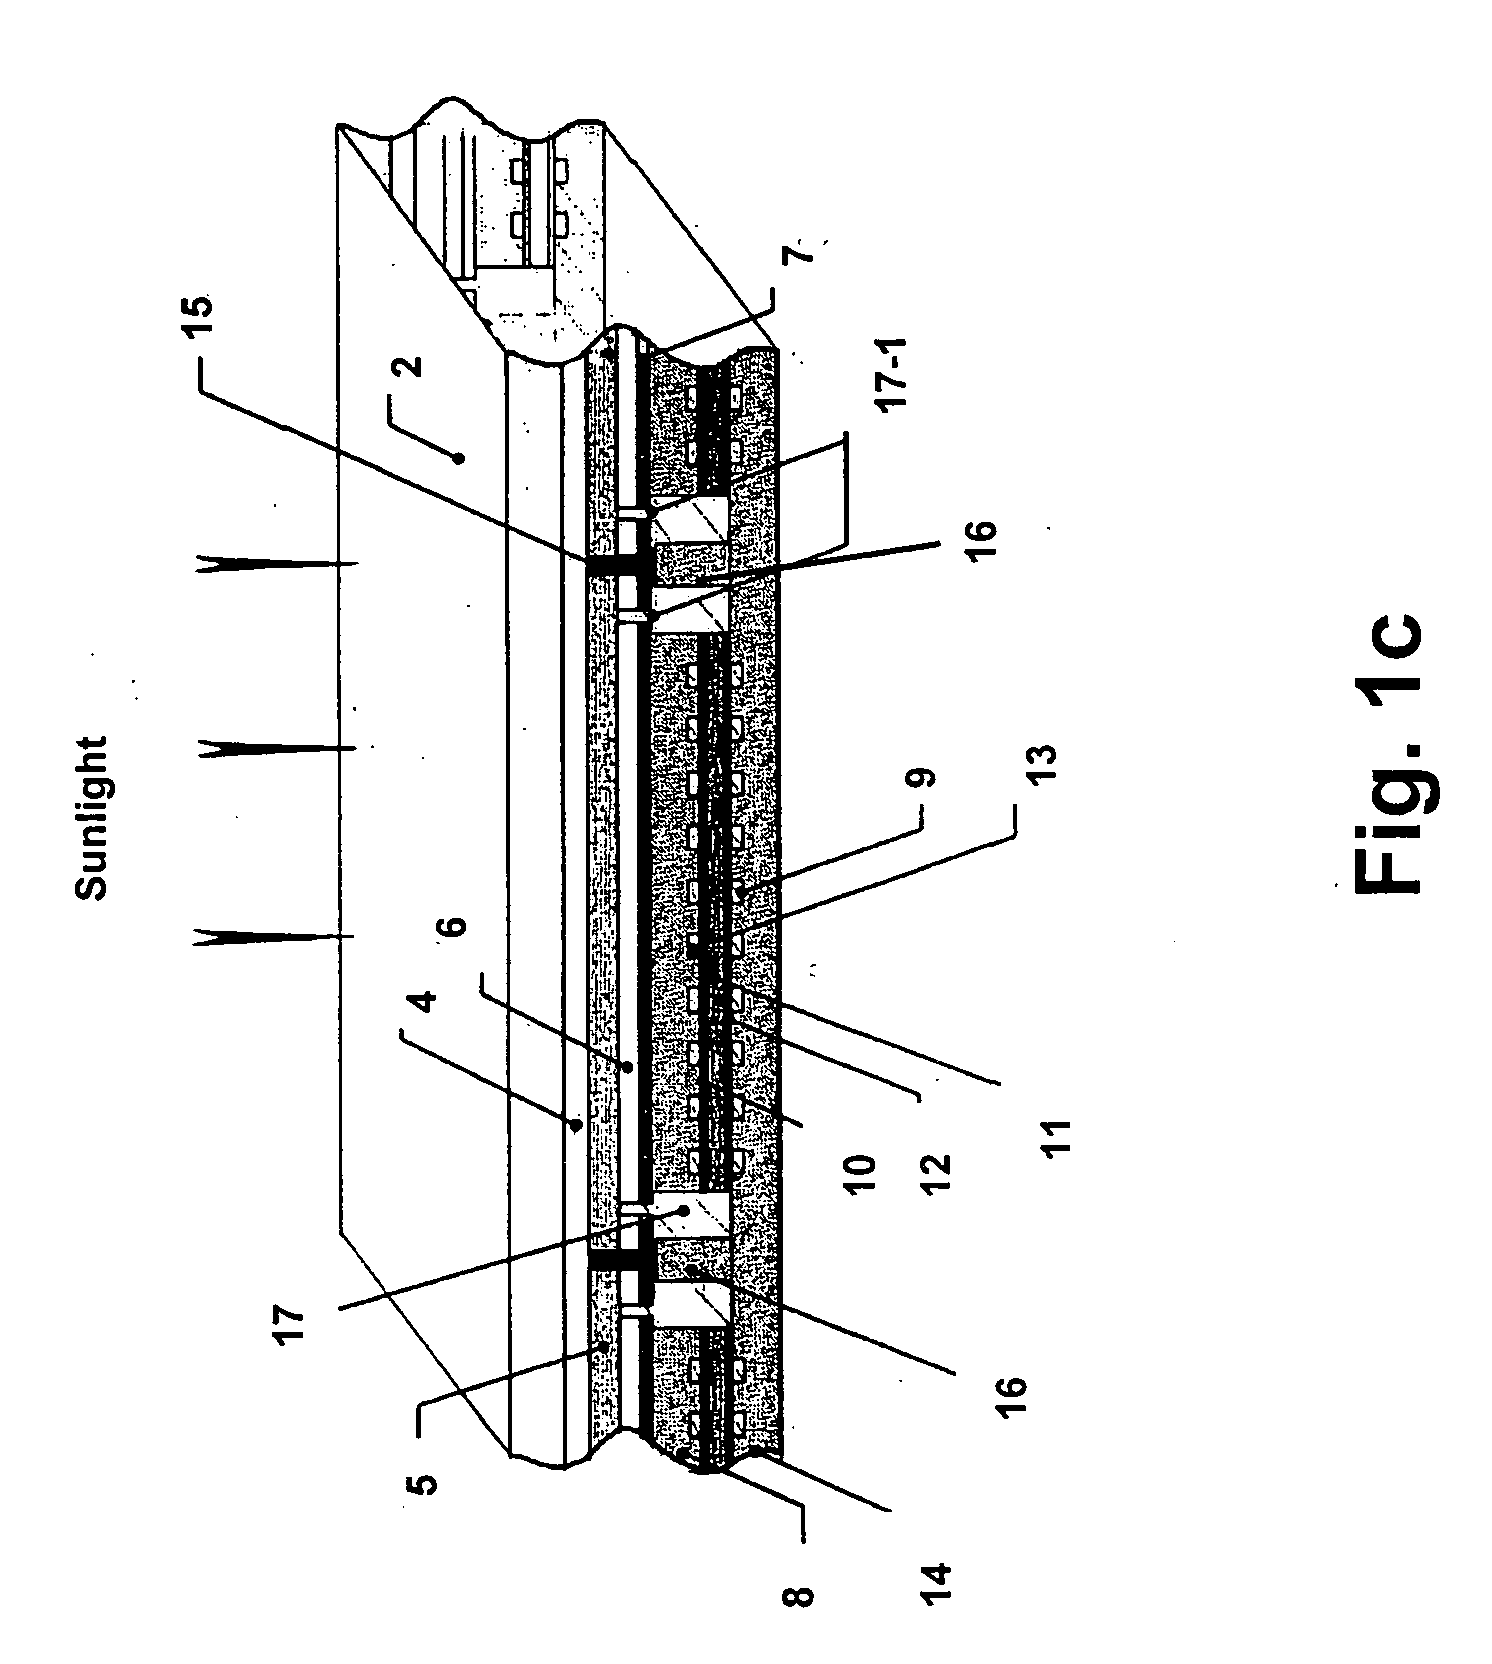 Integrated photoelectrochemical cell and system having a solid polymer electrolyte